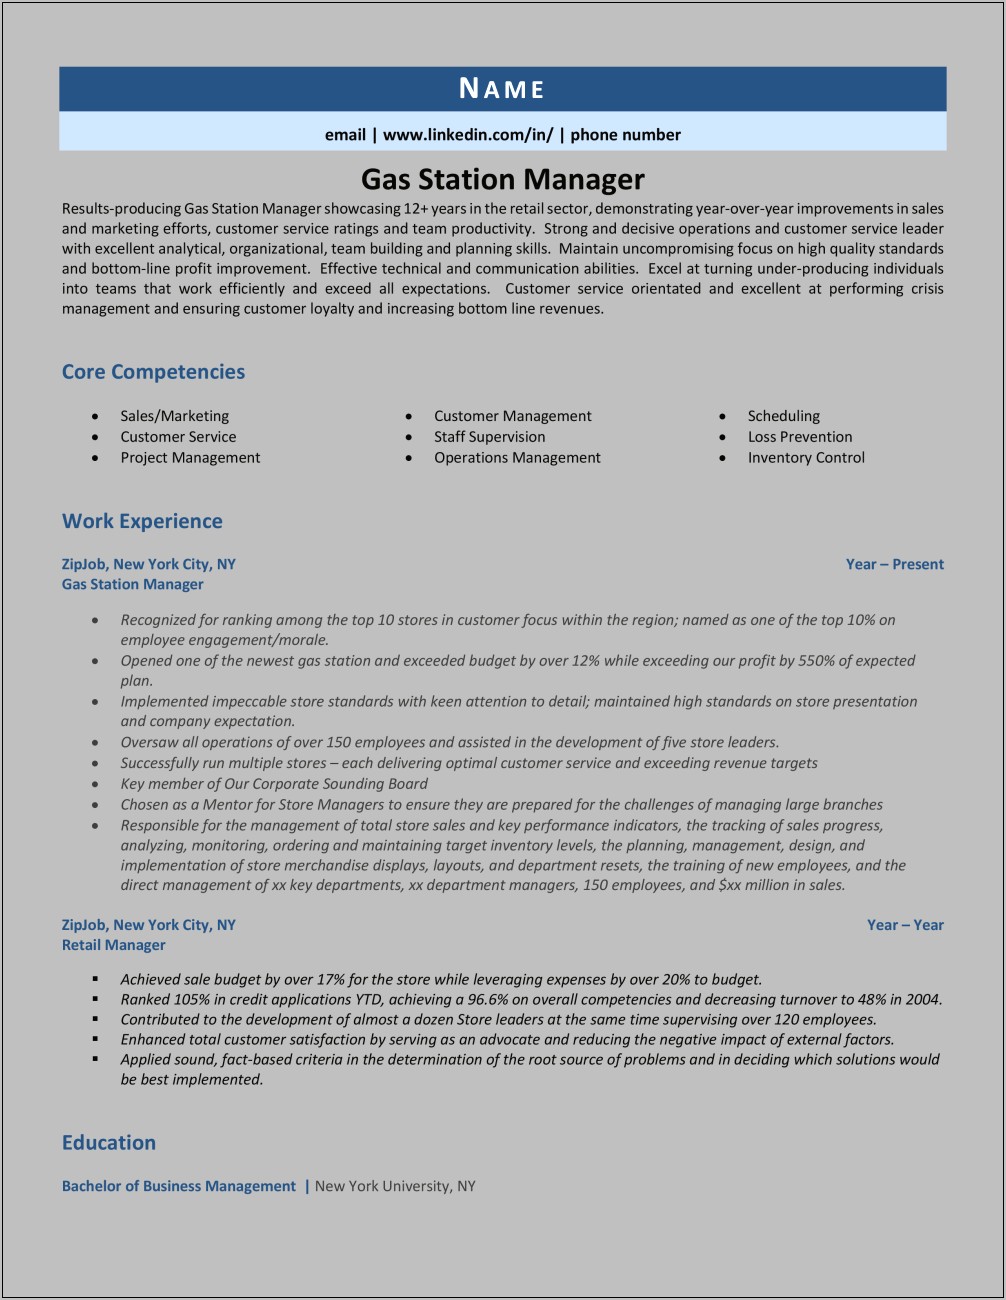 Resume Examples 2019 Gas Station Ampm